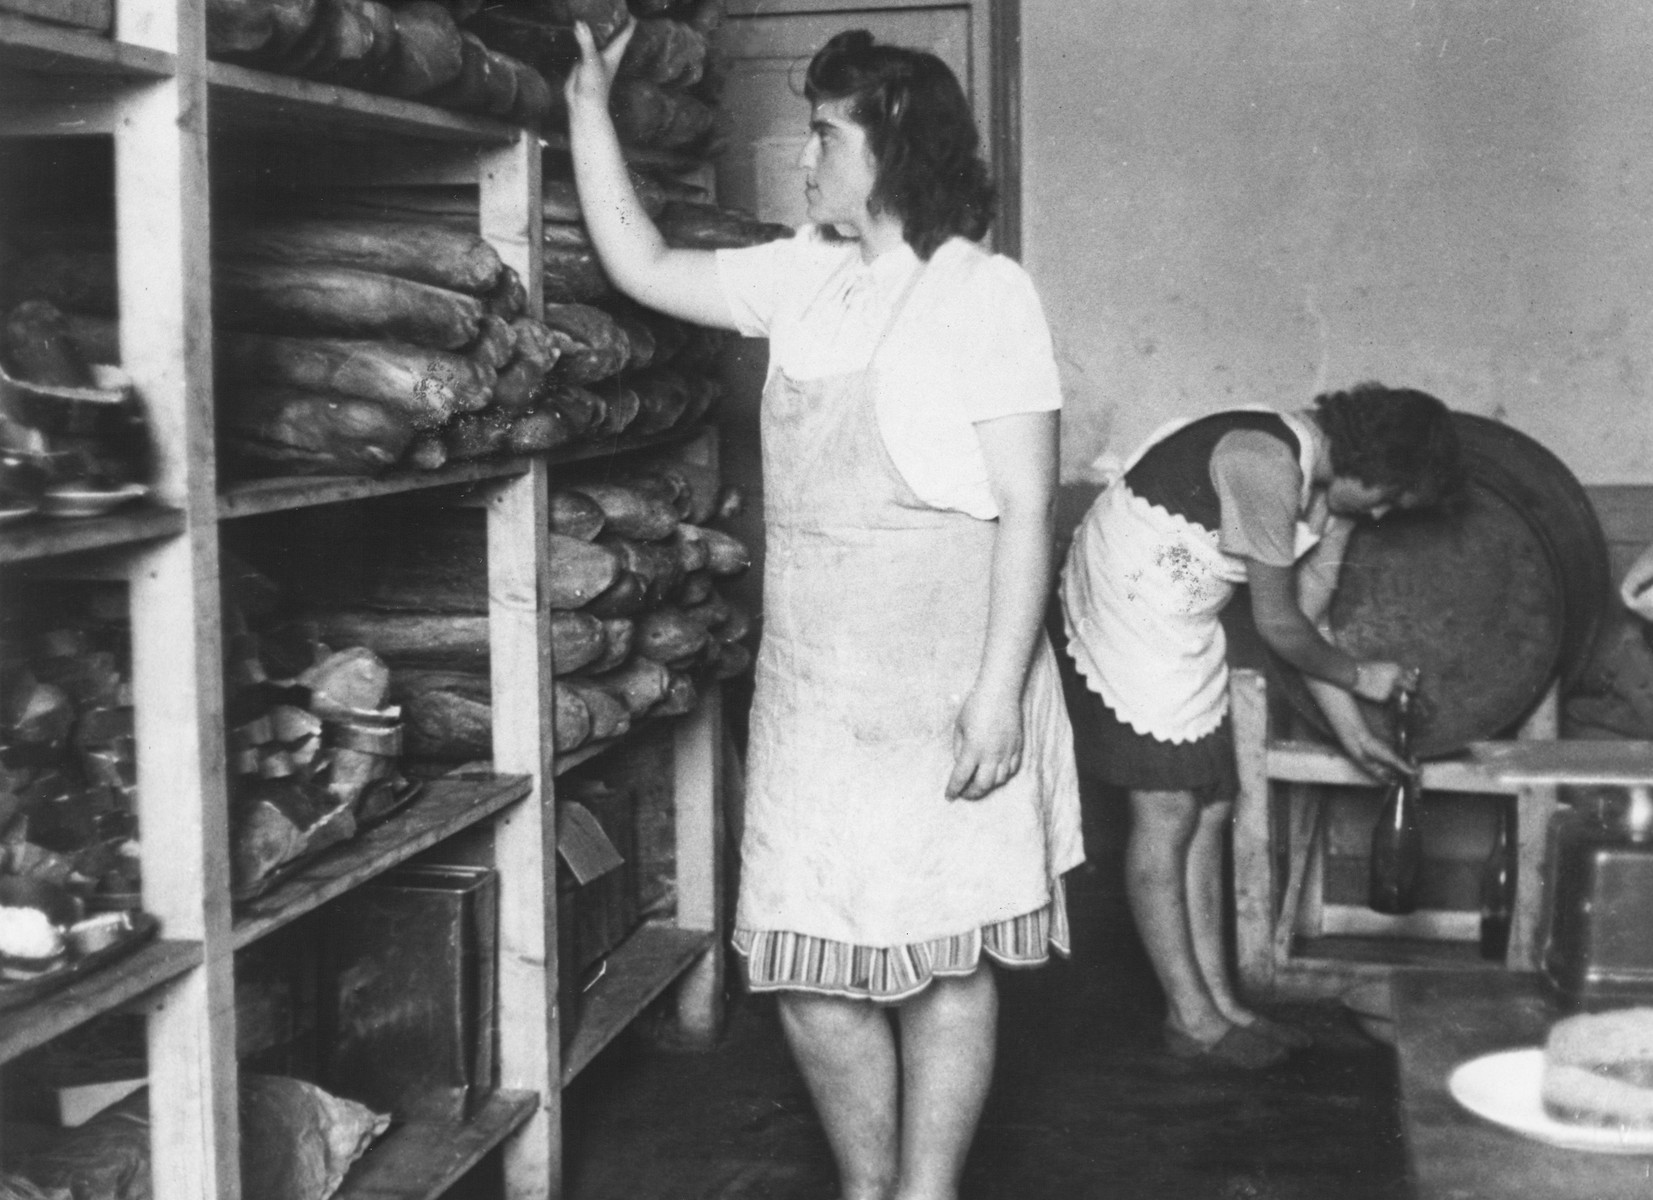 Ethel Zloczower, a Romanian Jewish teacher, stands by a bread pantry in the children's home in Vence.